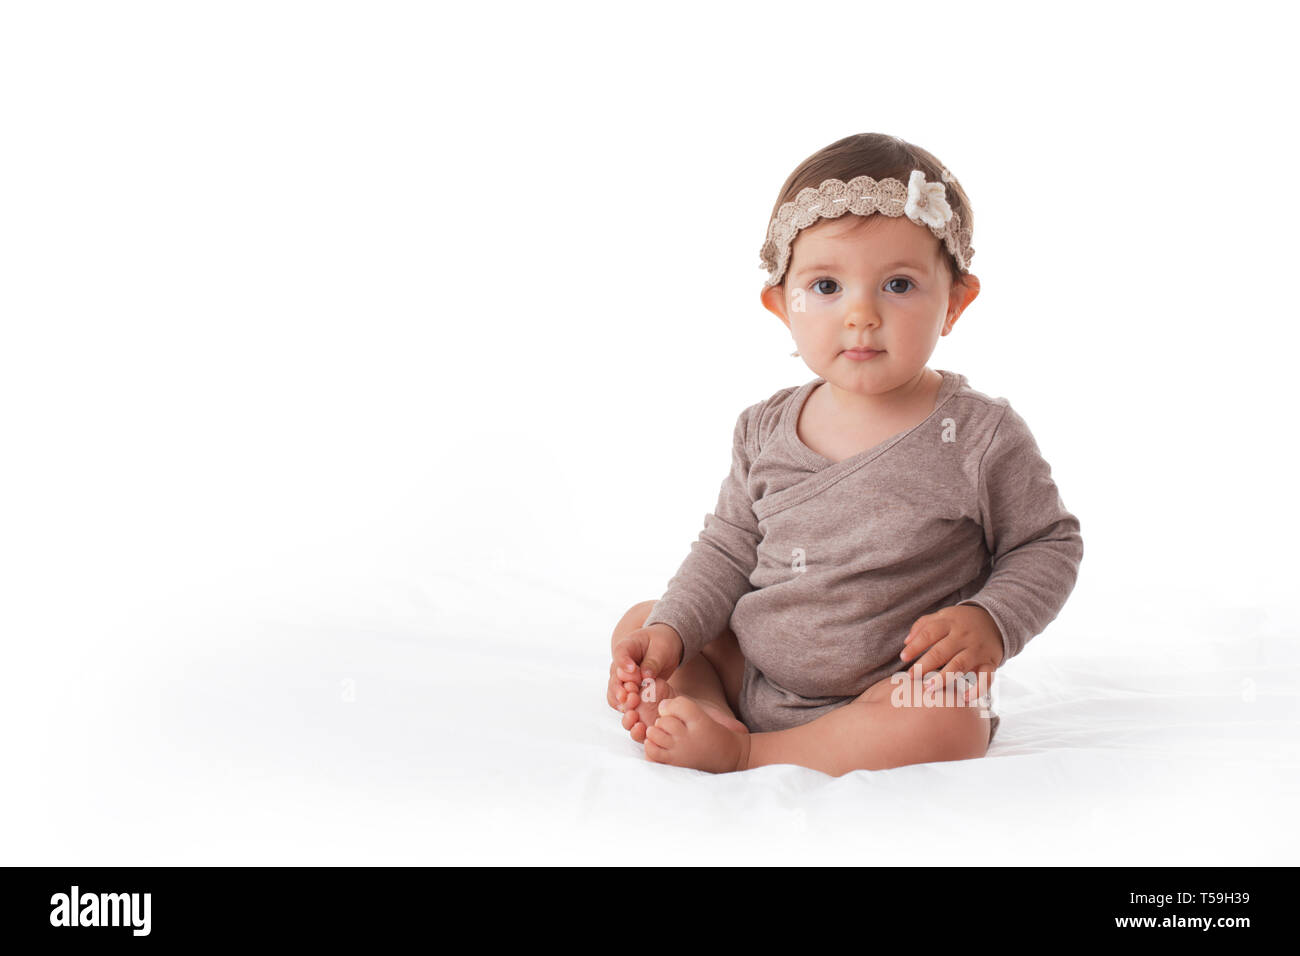 Adorable baby girl playing with his legs portrait Stock Photo